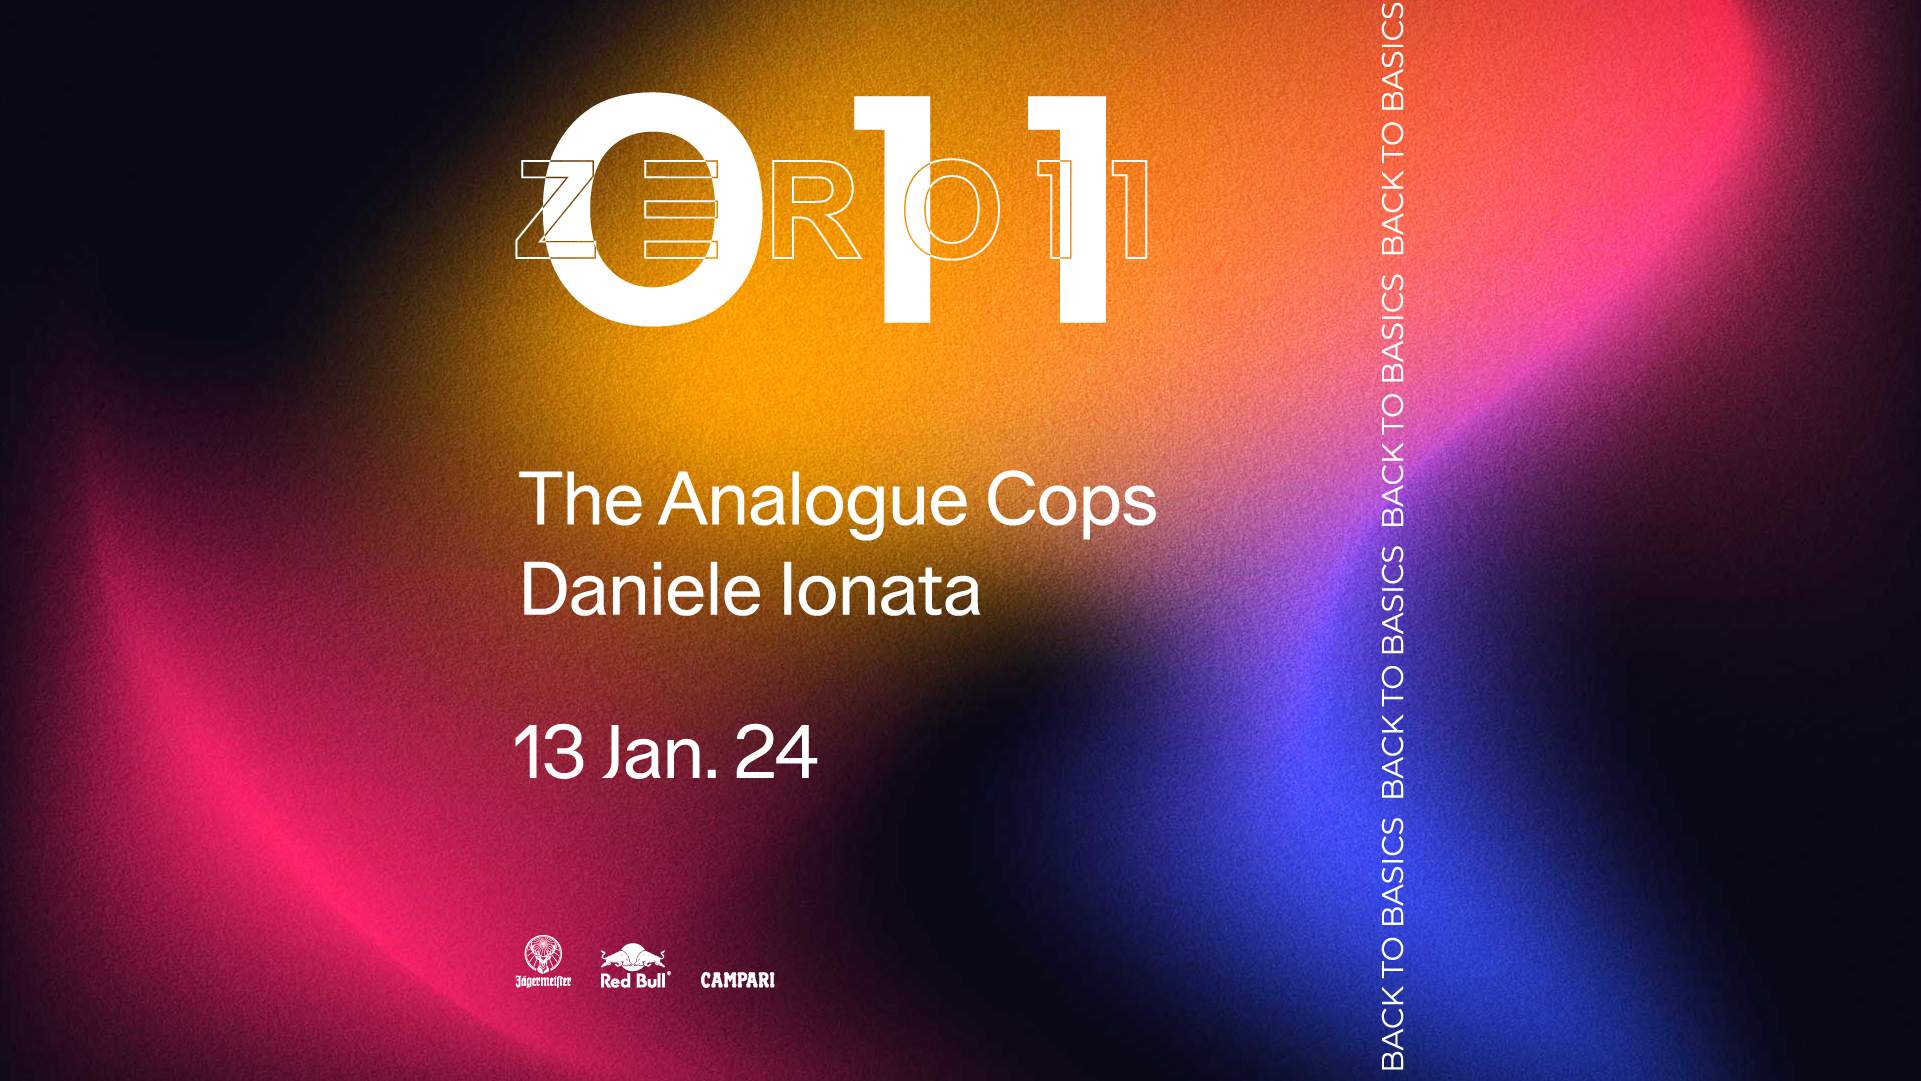 Club Zero11 pres. Back To Basics with The Analogue Cops and Daniele Ionata - フライヤー表